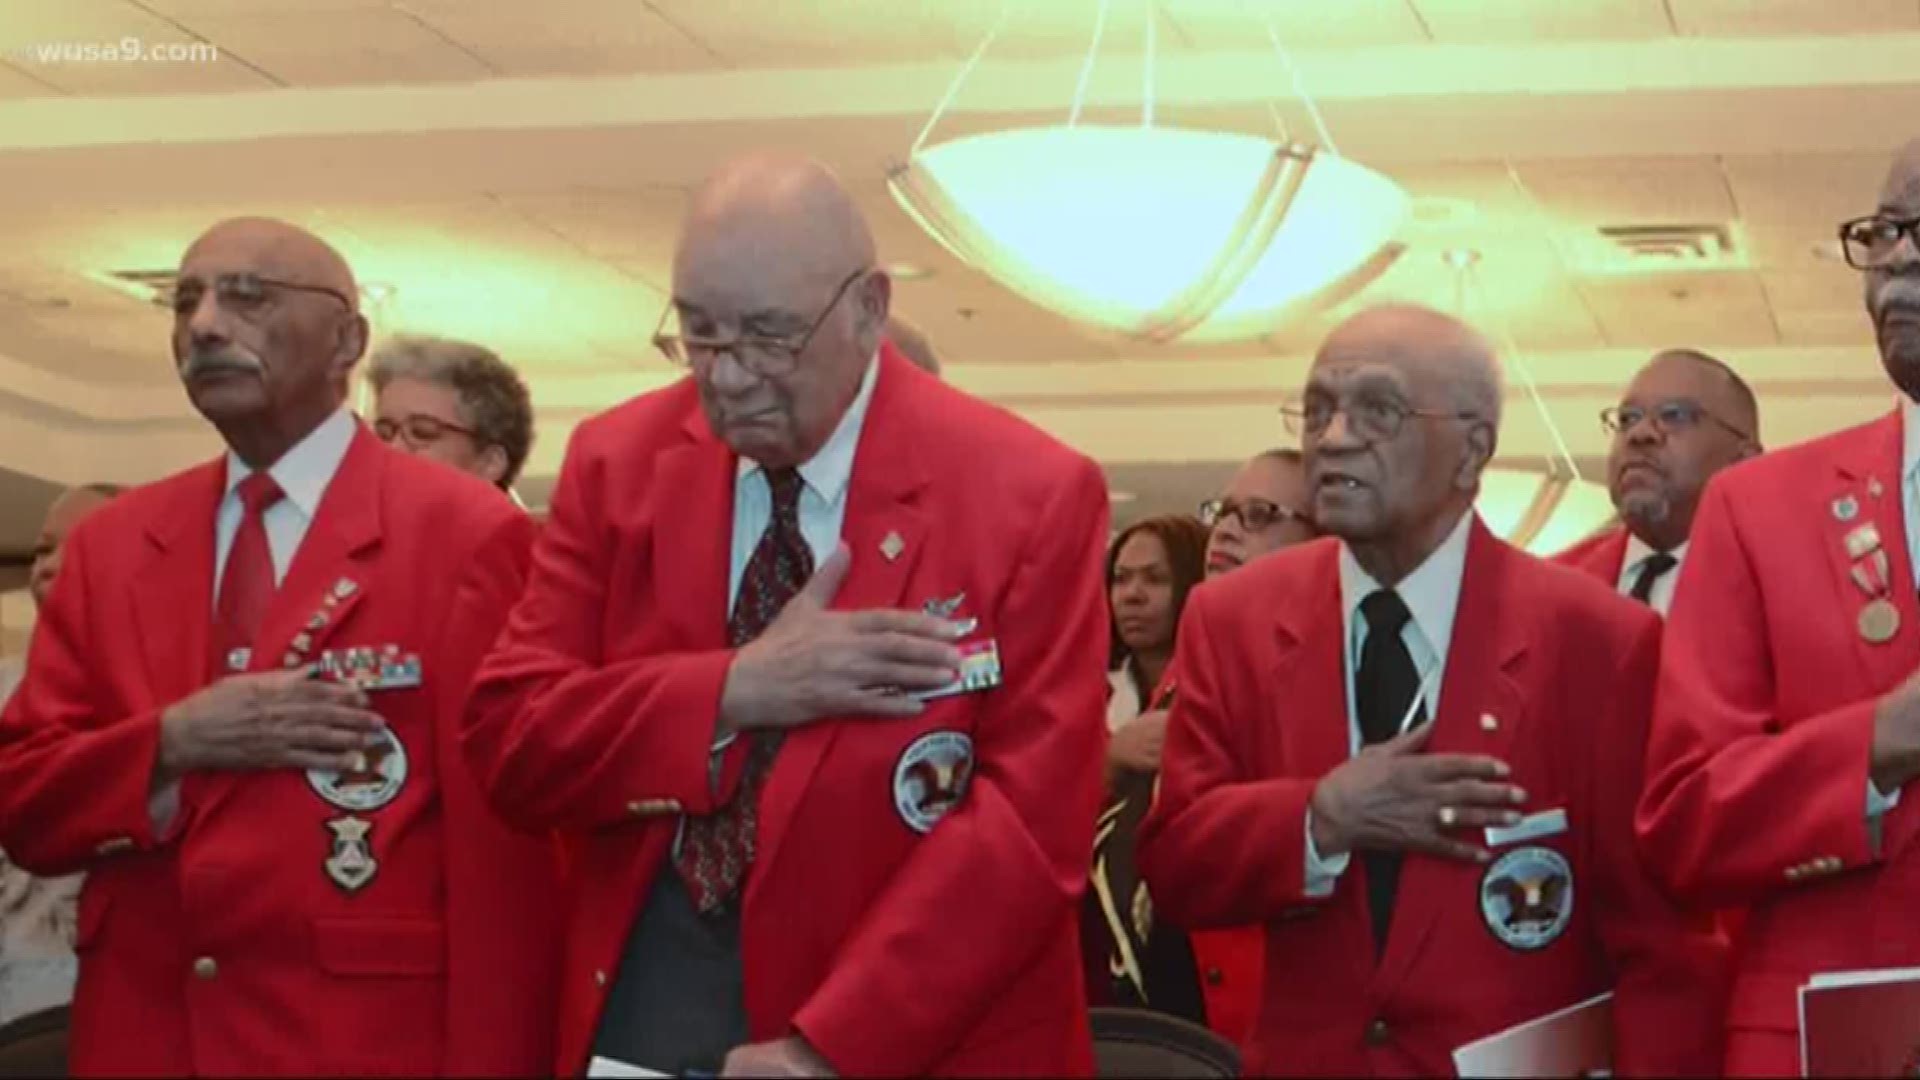 Organizations like the East Coast Chapter Tuskegee Airmen are working to get young people interested in aviation.
You can find information on their Youth Aviation program here: http://www.ecctai.org/youth-aviation-program